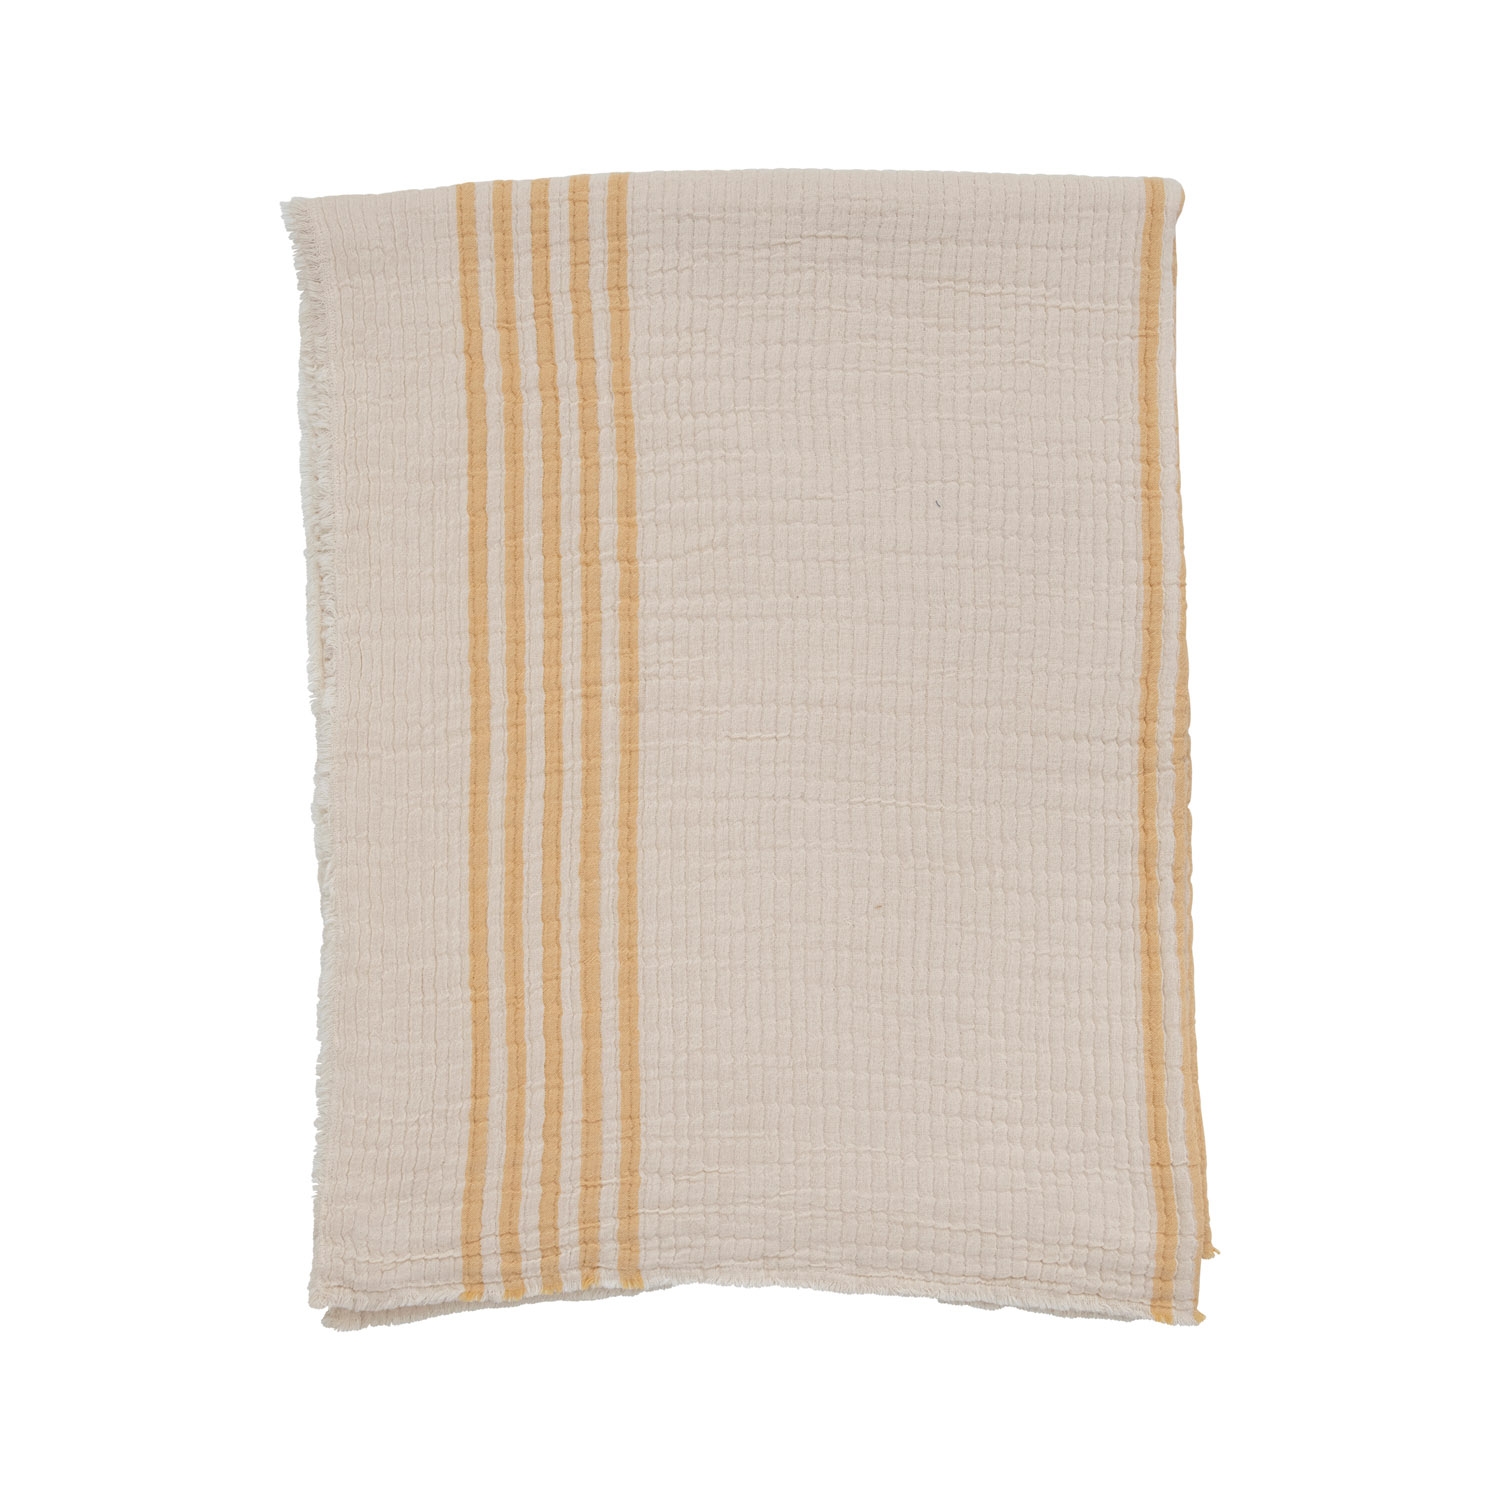 Cotton Double Cloth Stitched Throw with Stripes and Frayed Edges - Image 0